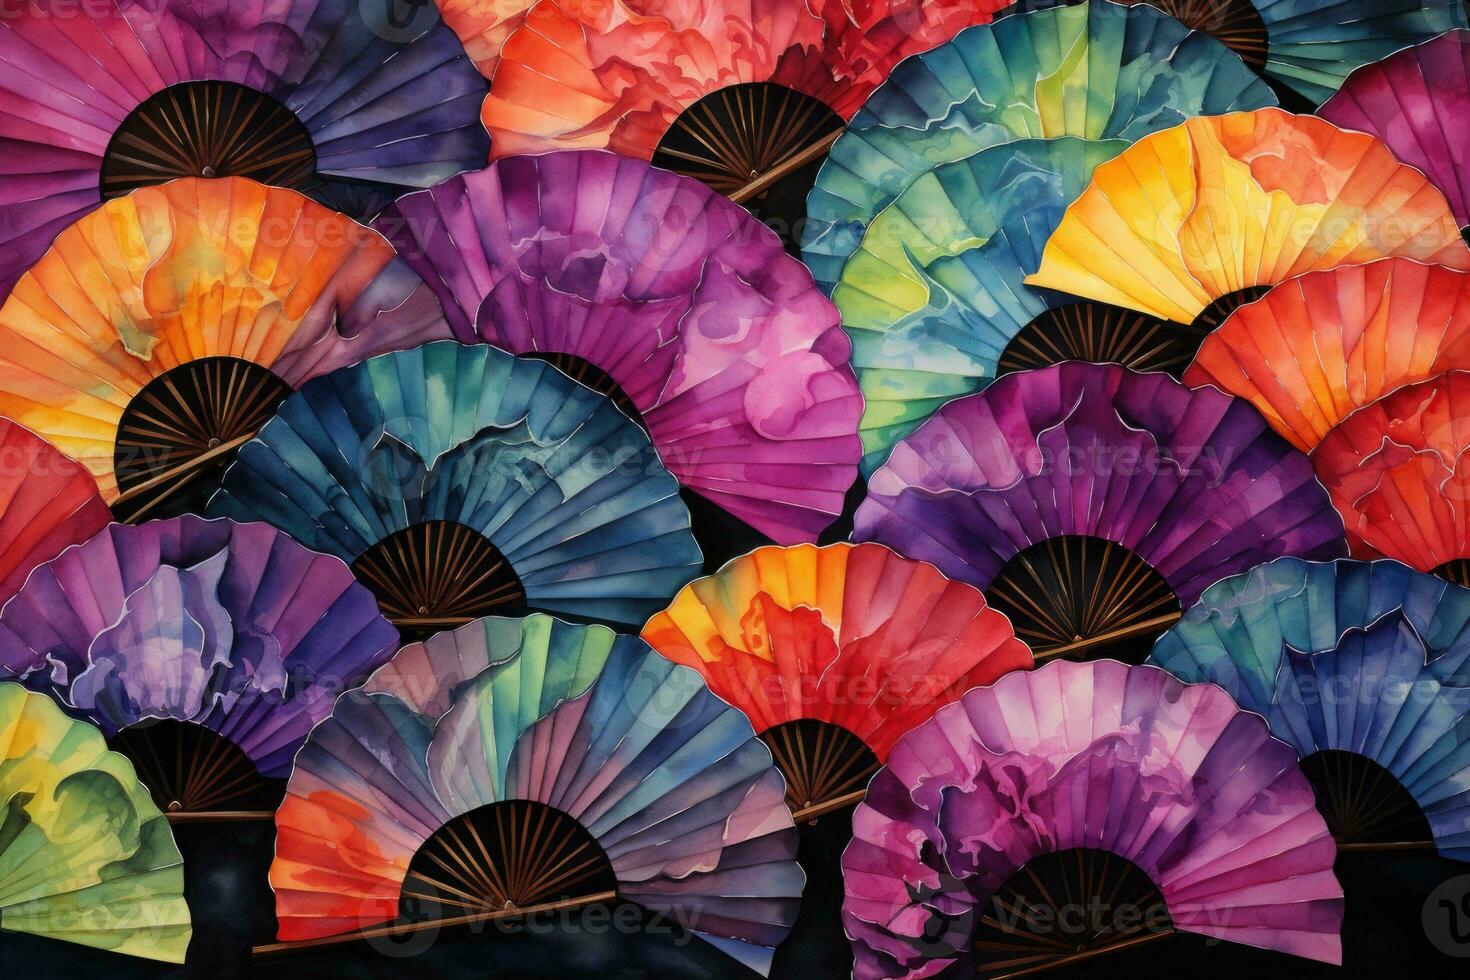 Festive fans in Chinese and Japanese style. Watercolor texture photo